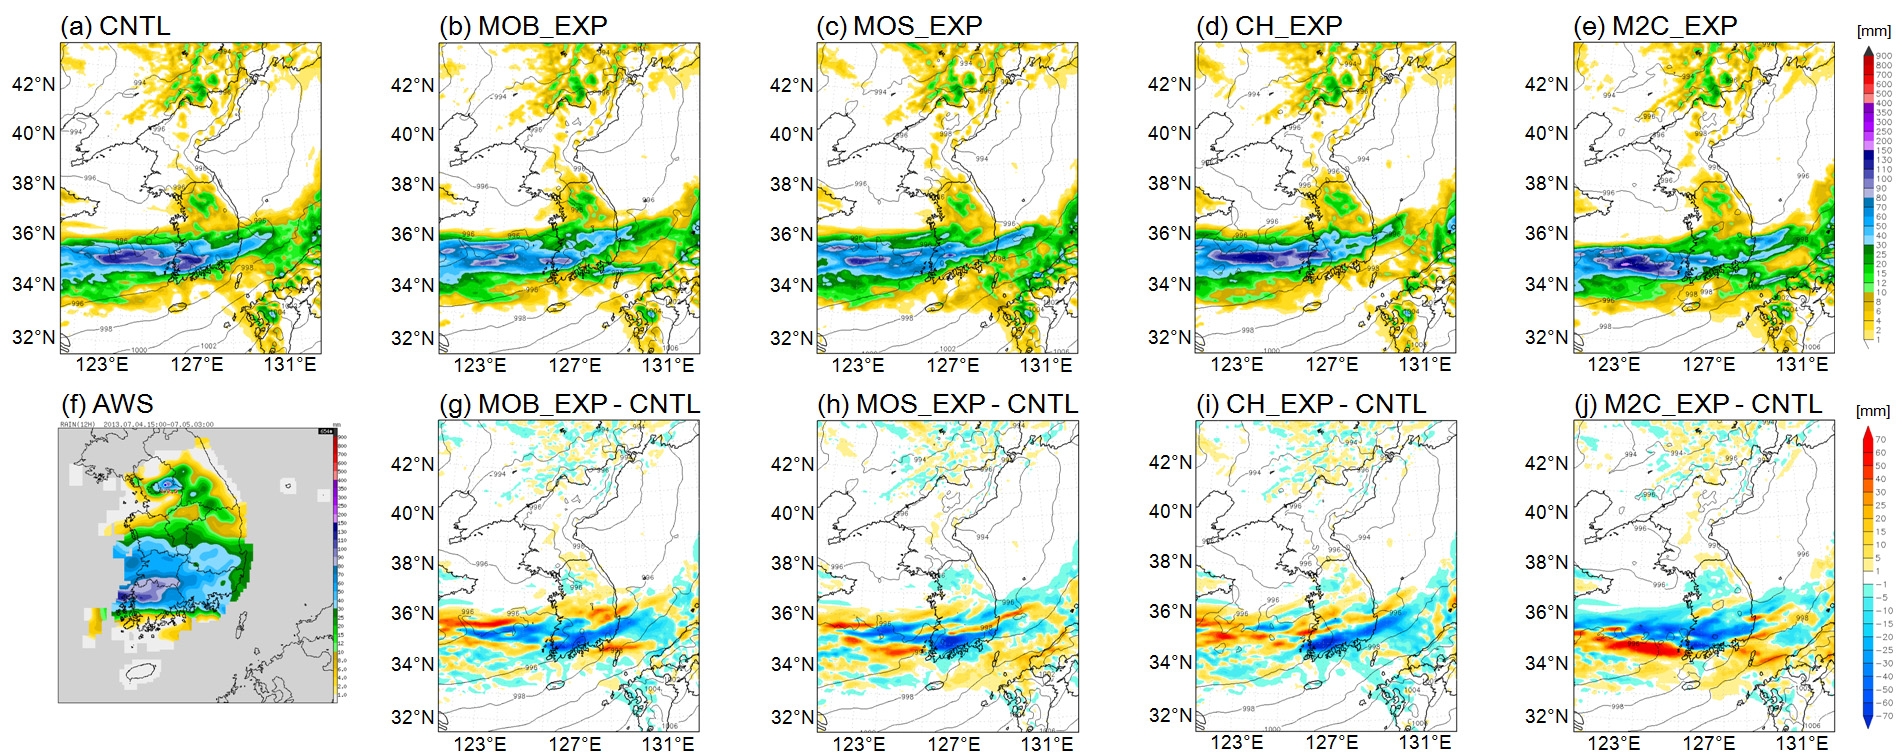 Fig. 3.3.1.14. 12 hours accumulated precipitation simulated (a) CNTL, (b) MOB_EXP, (c) MOS_EXP, (d) CH_EXP, (e) M2C_EXP, (f) AWS and difference of CNTL from (g) MOB_EXP, (h) MOS_EXP, (i) CH_EXP, and (j) M2C_EXP of 12 hours accumulated precipitation simulated at 1800 UTC 4 July 2013.